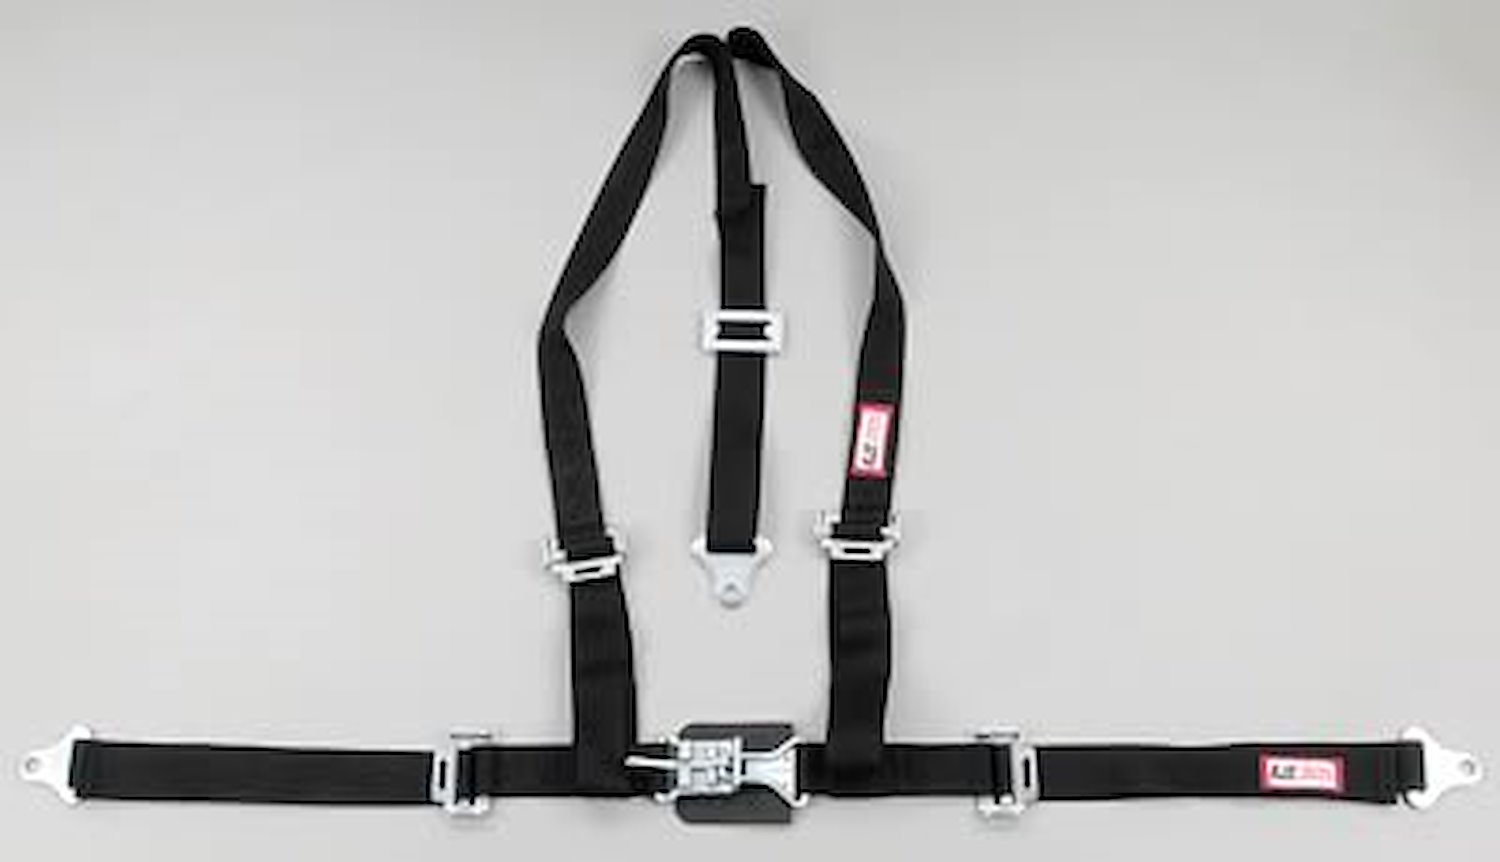 NON-SFI L&L HARNESS 2 PULL DOWN Lap Belt SEWN IN 2 S.H. V ROLL BAR Mount w/STERNUM STRAP ALL SNAP ENDS RED